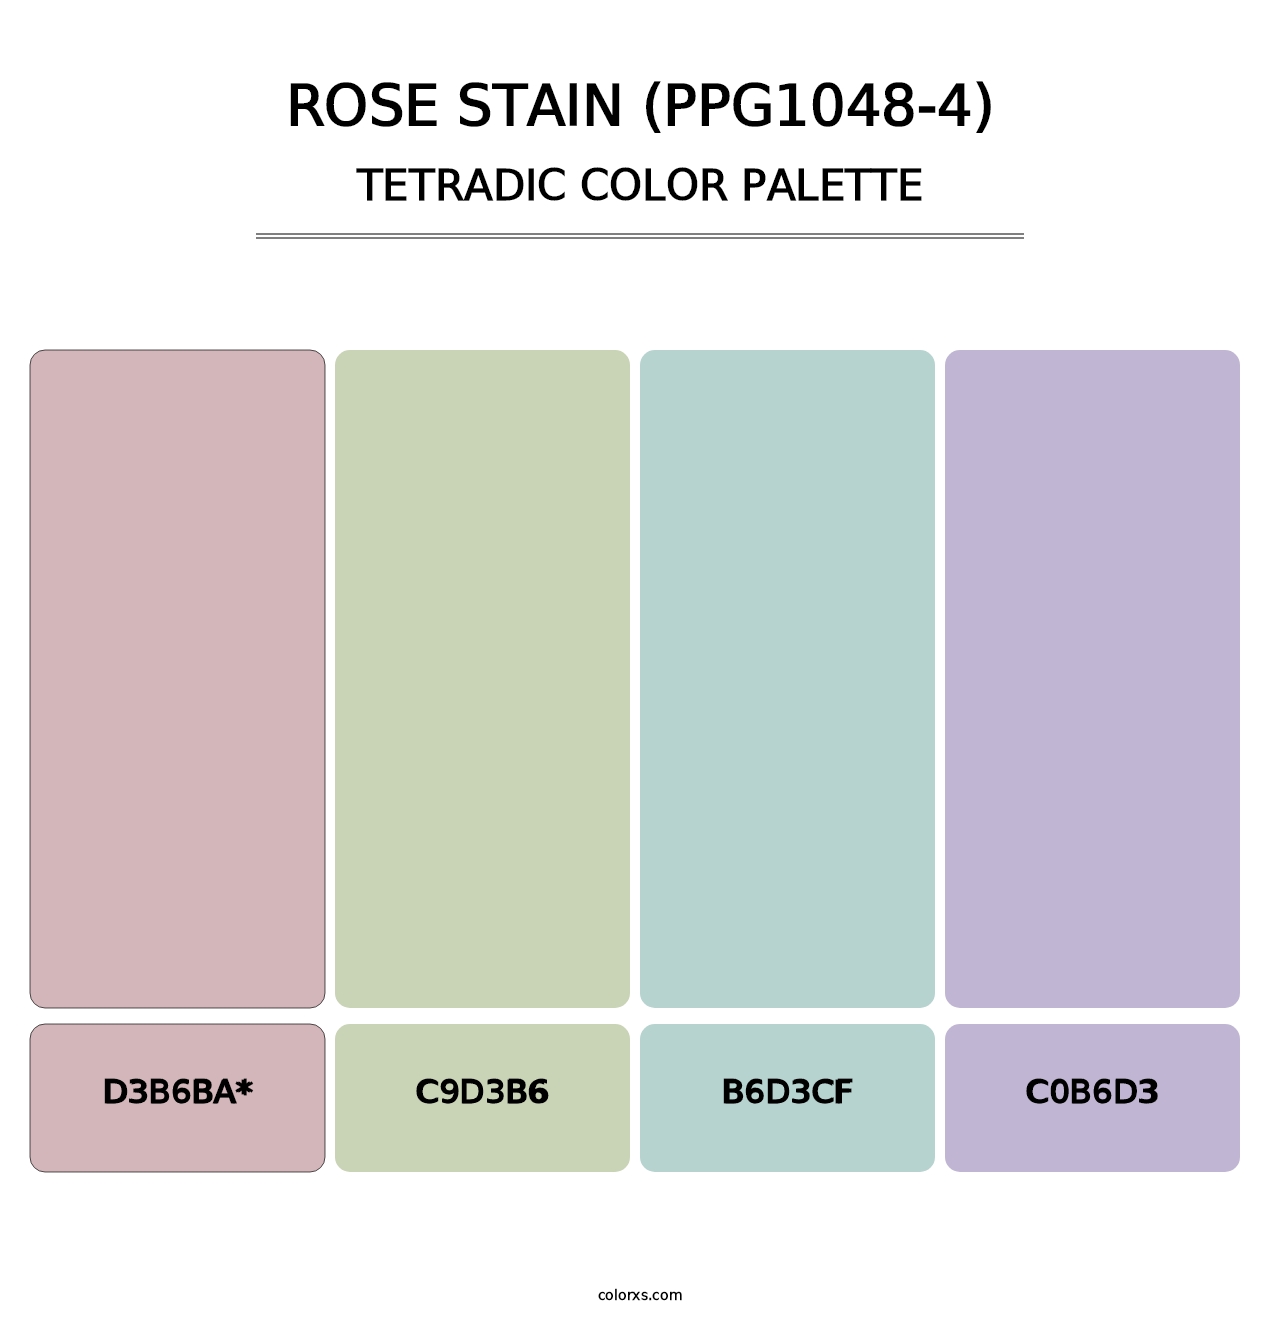 Rose Stain (PPG1048-4) - Tetradic Color Palette